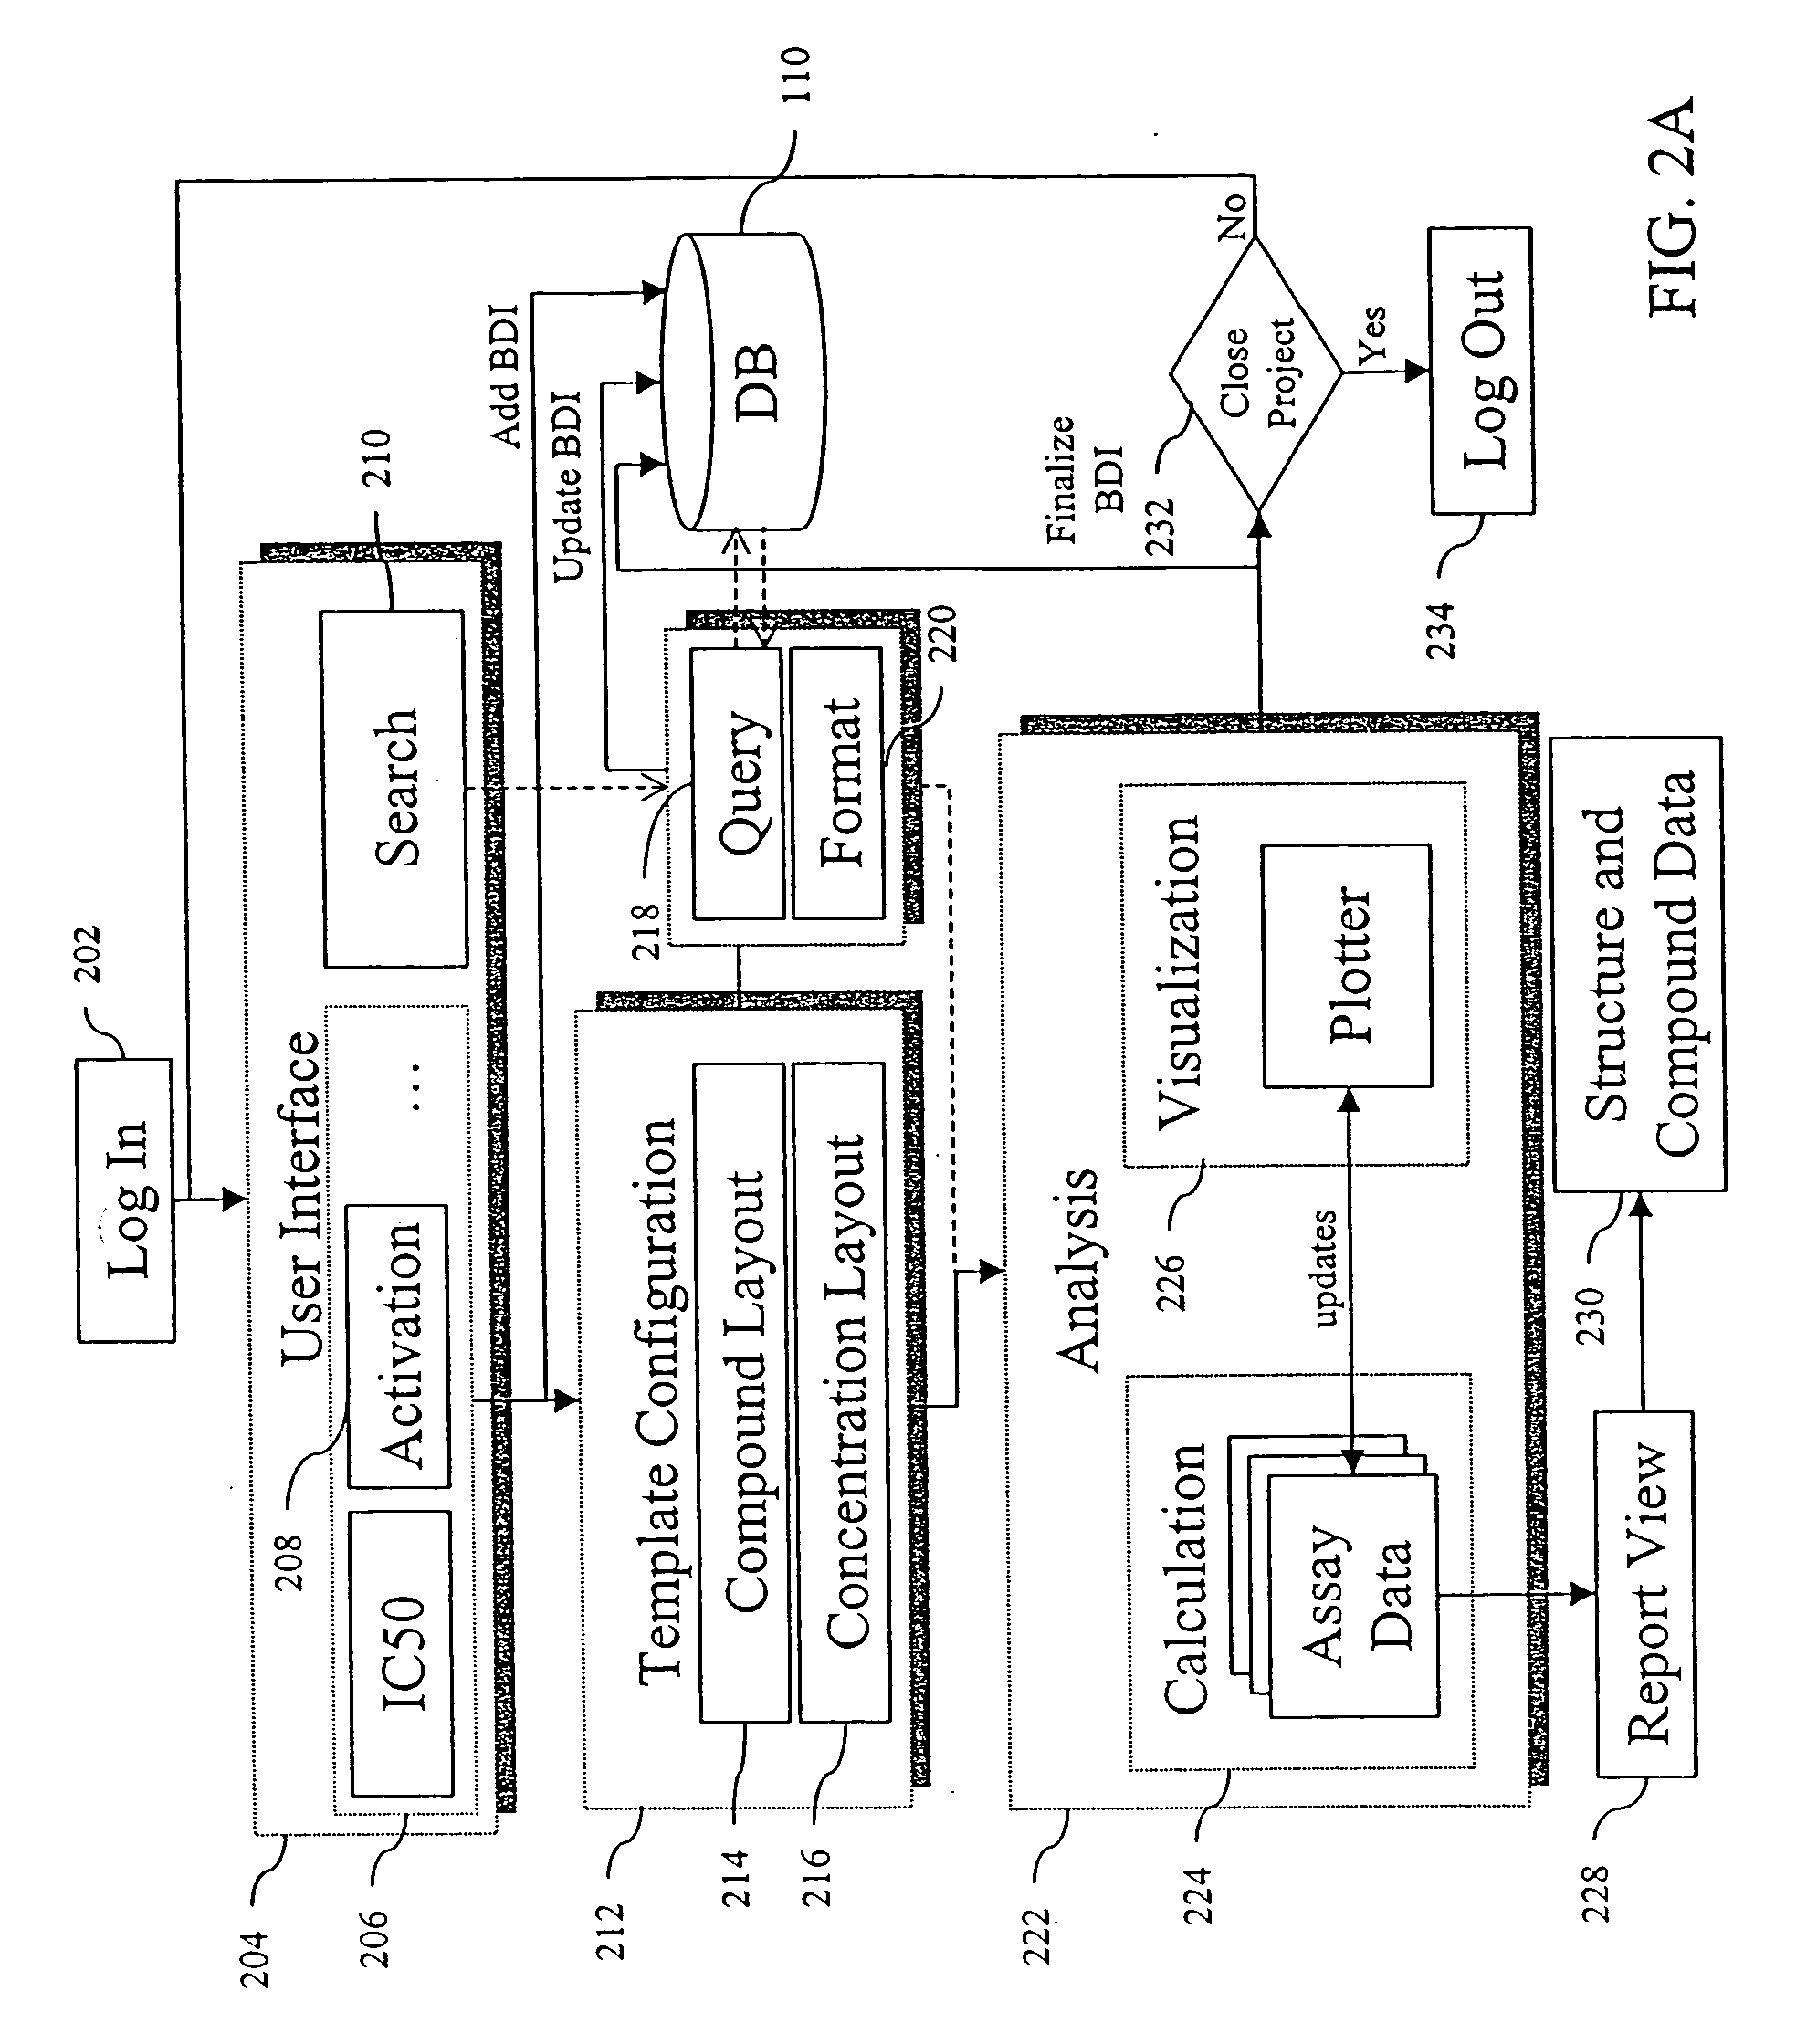 System and method for data analysis, manipulation, and visualization